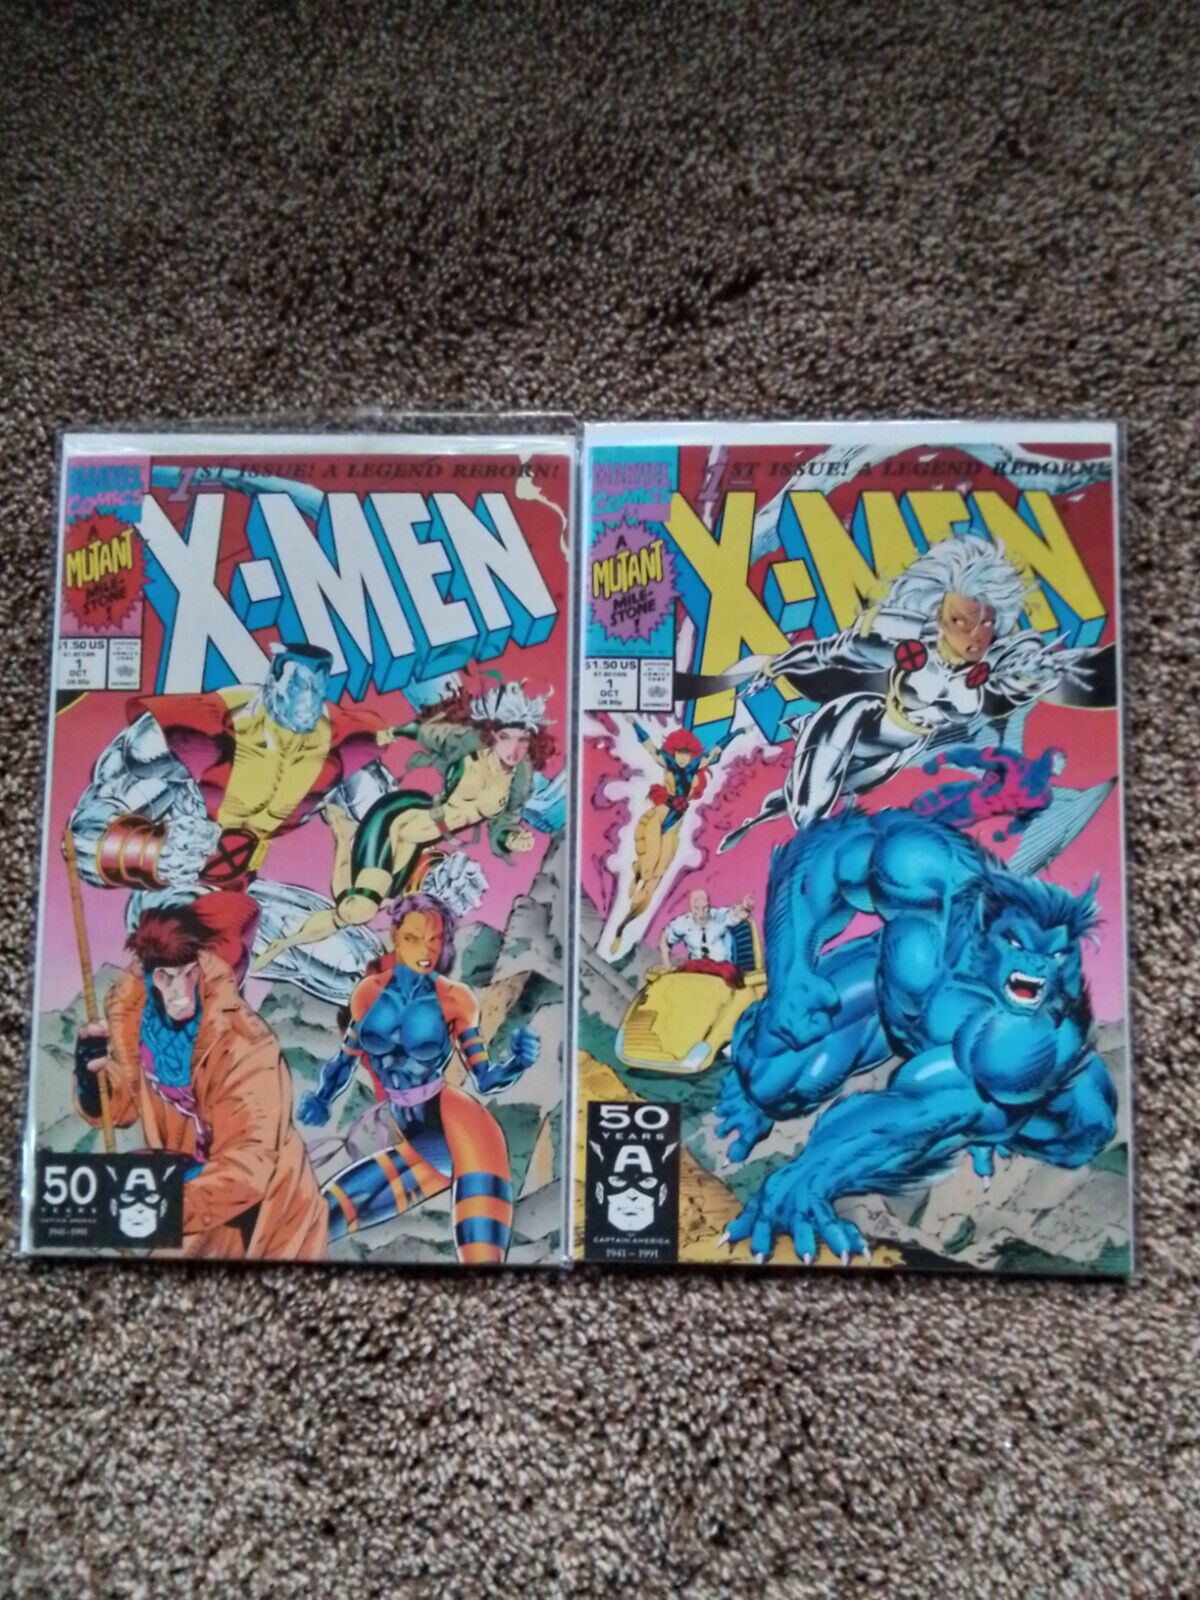 TWO VINTAGE #1 X-MEN COMIC BOOKS VARIANT COVERS